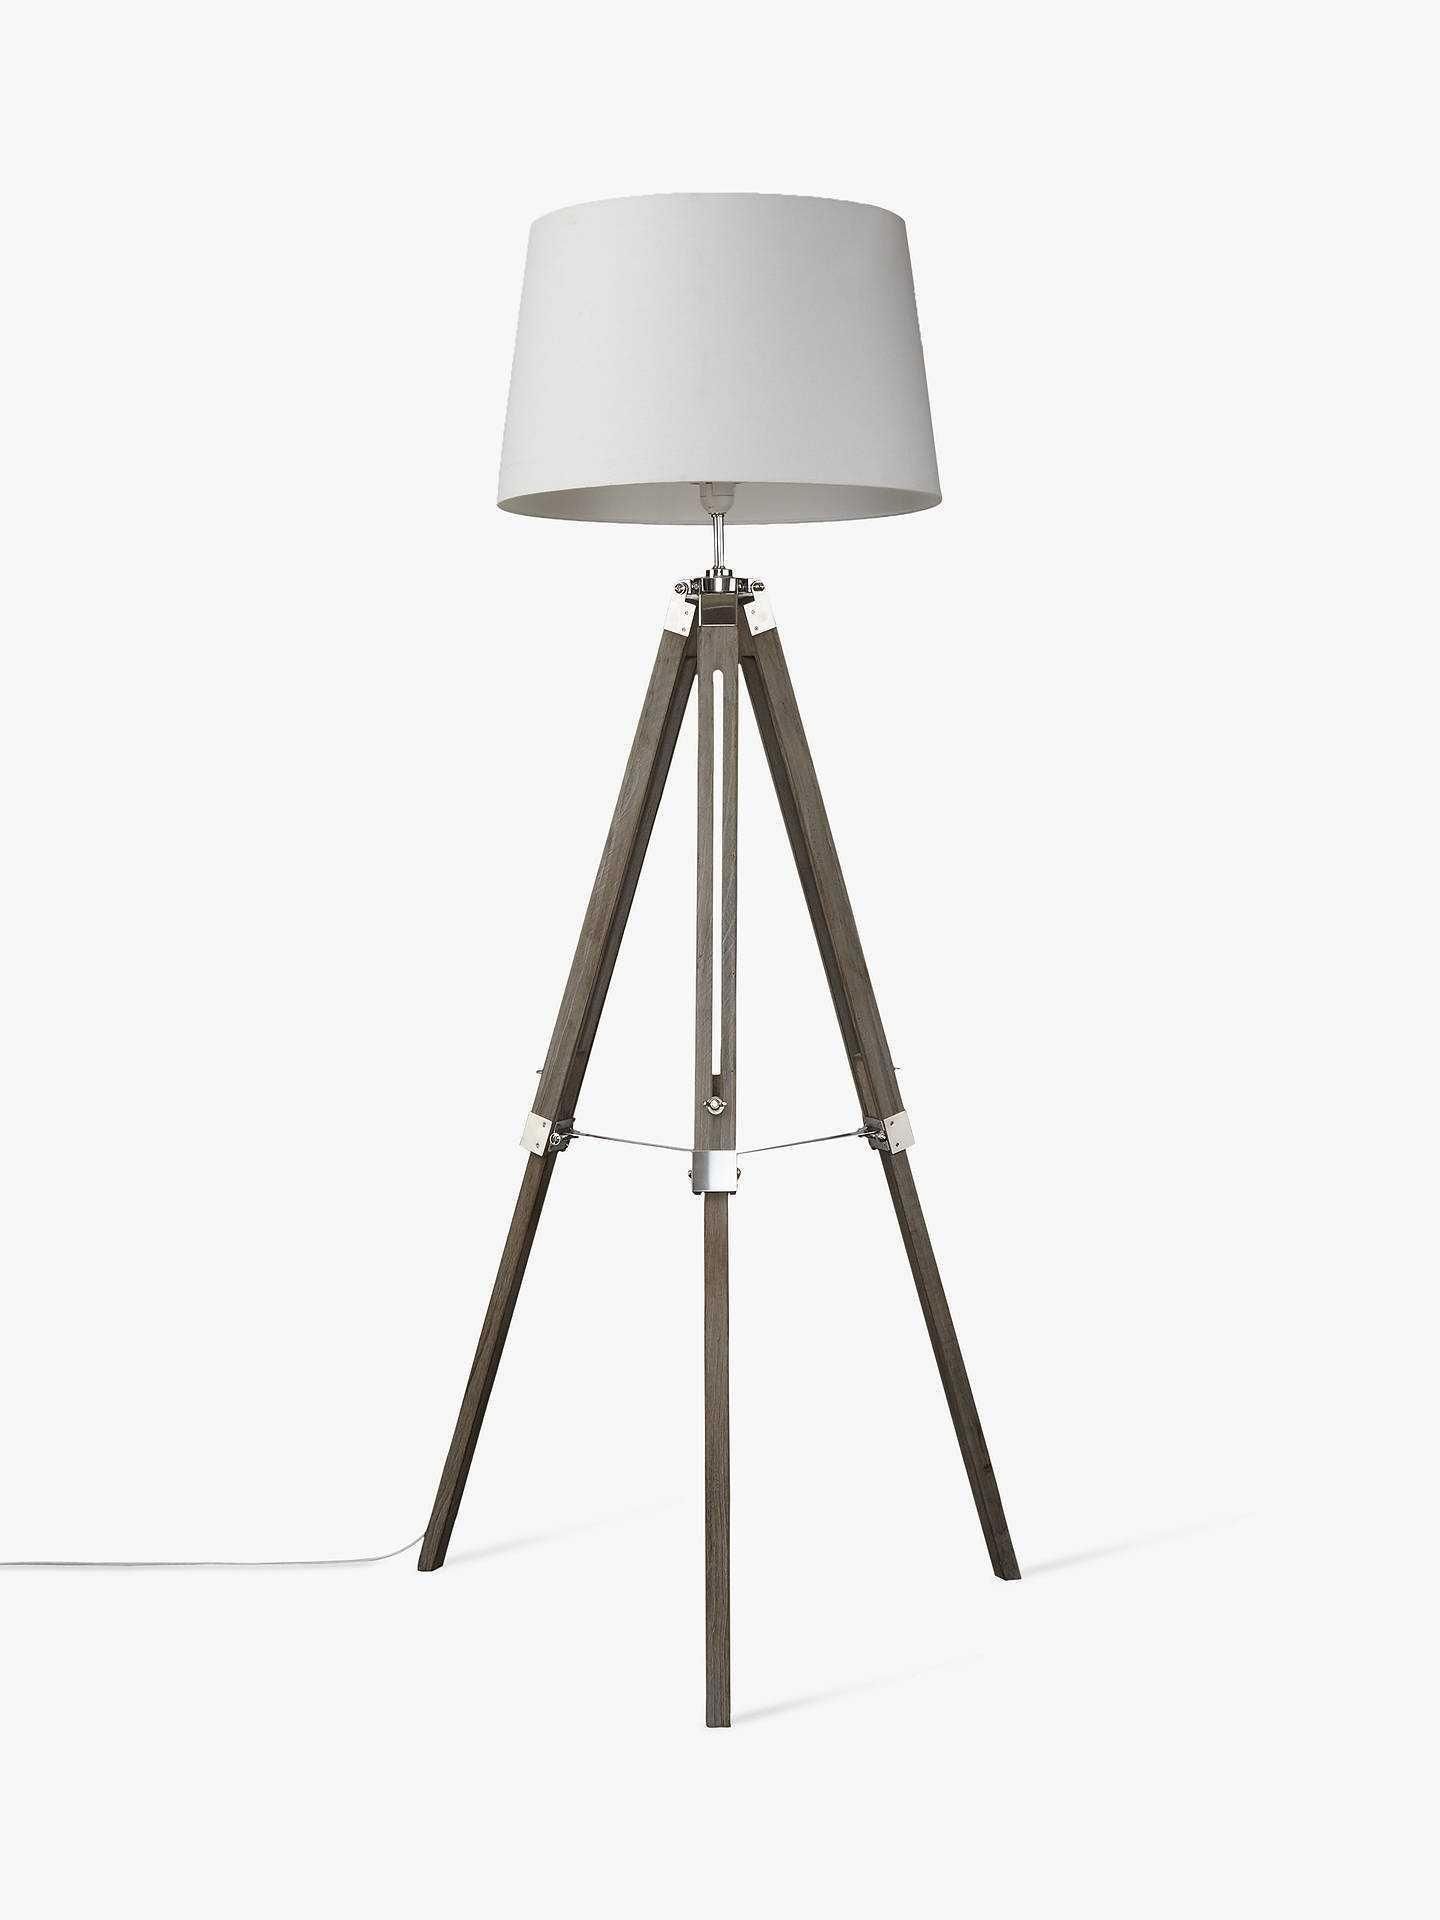 Rrp £135 When Complete Boxed Jacques Tripod Floor Lamp Shade Only - Image 2 of 2